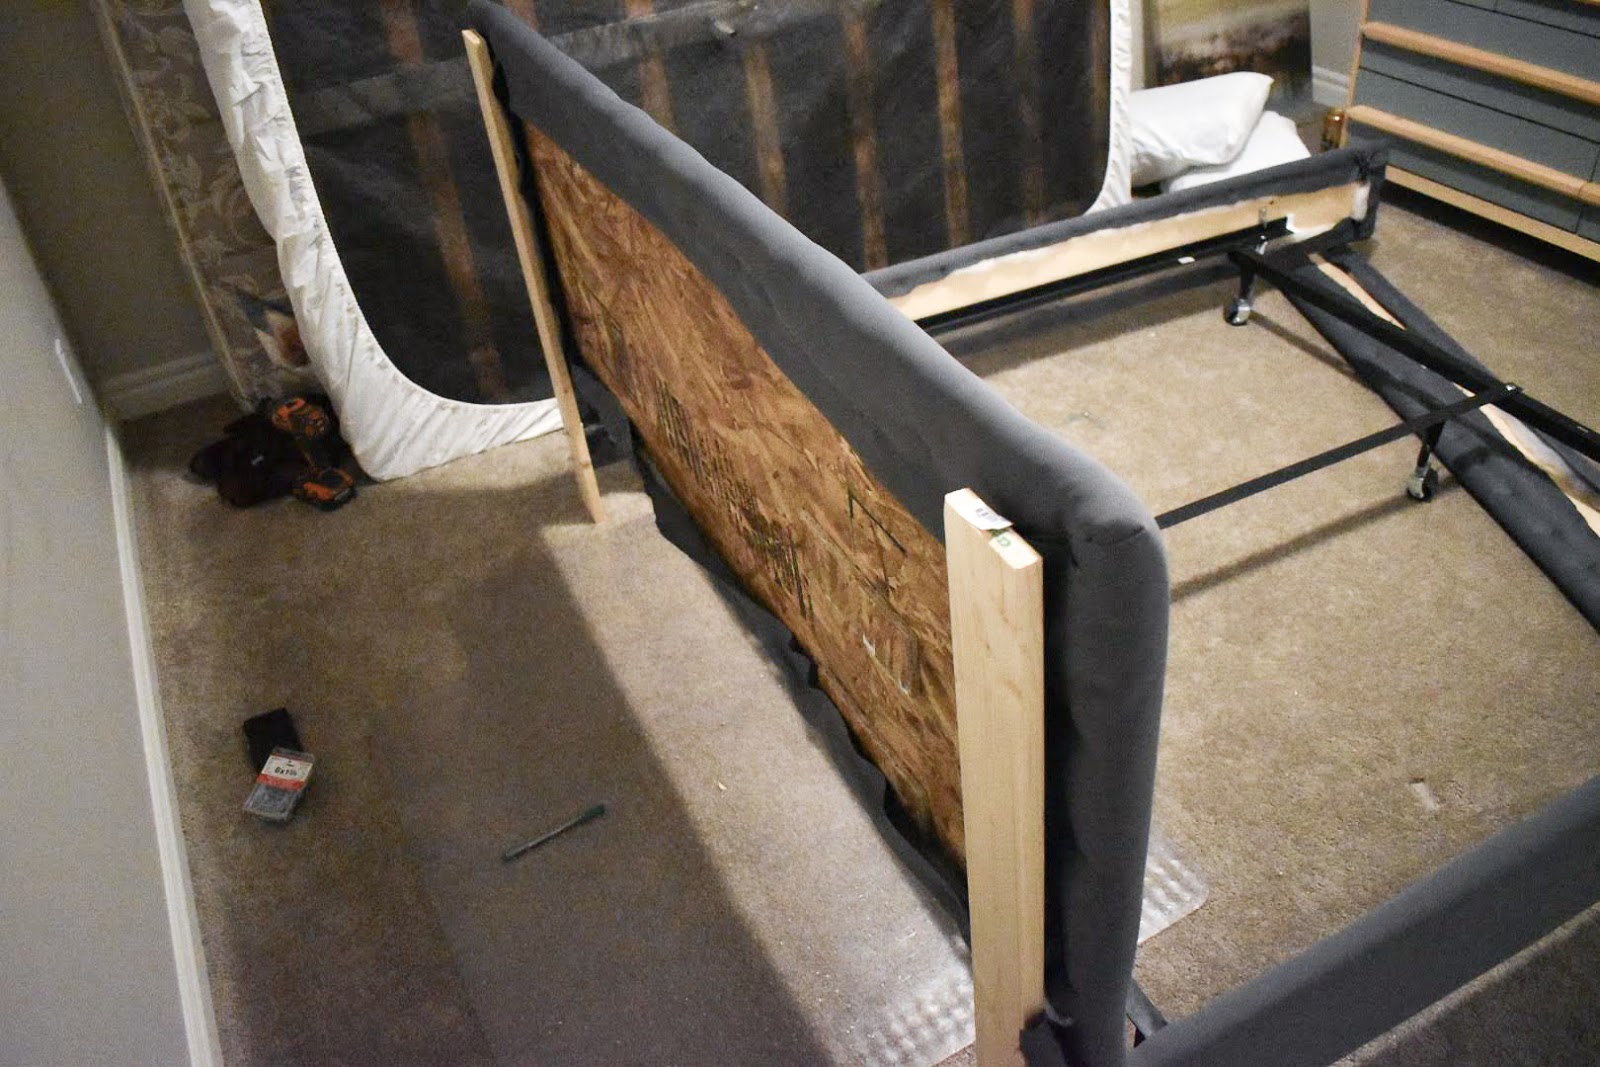 Metal Bed Frame Into An Upholstered, Can You Attach A Headboard To Any Frame